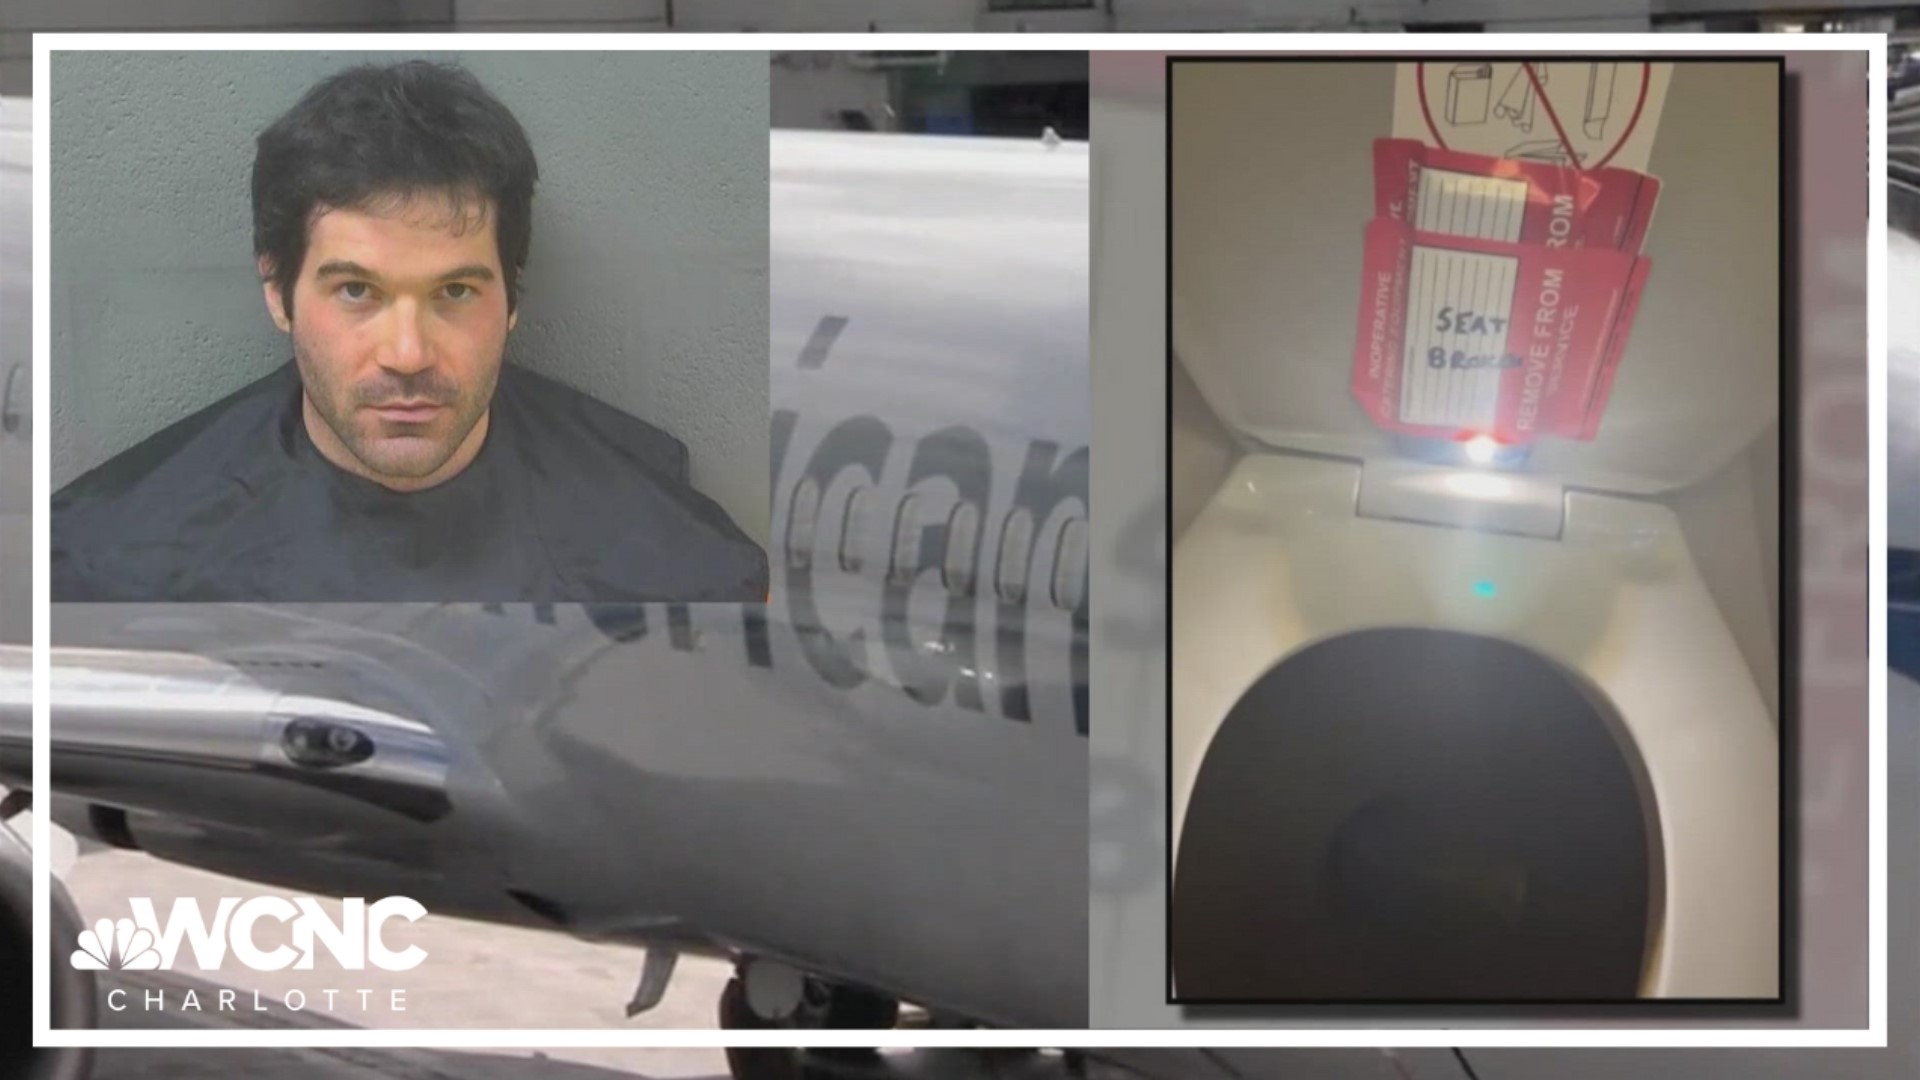 An American Airlines flight attendant is now behind bars, after allegedly recording a teenager in a plane bathroom. The FBI now says this is not an isolated event.